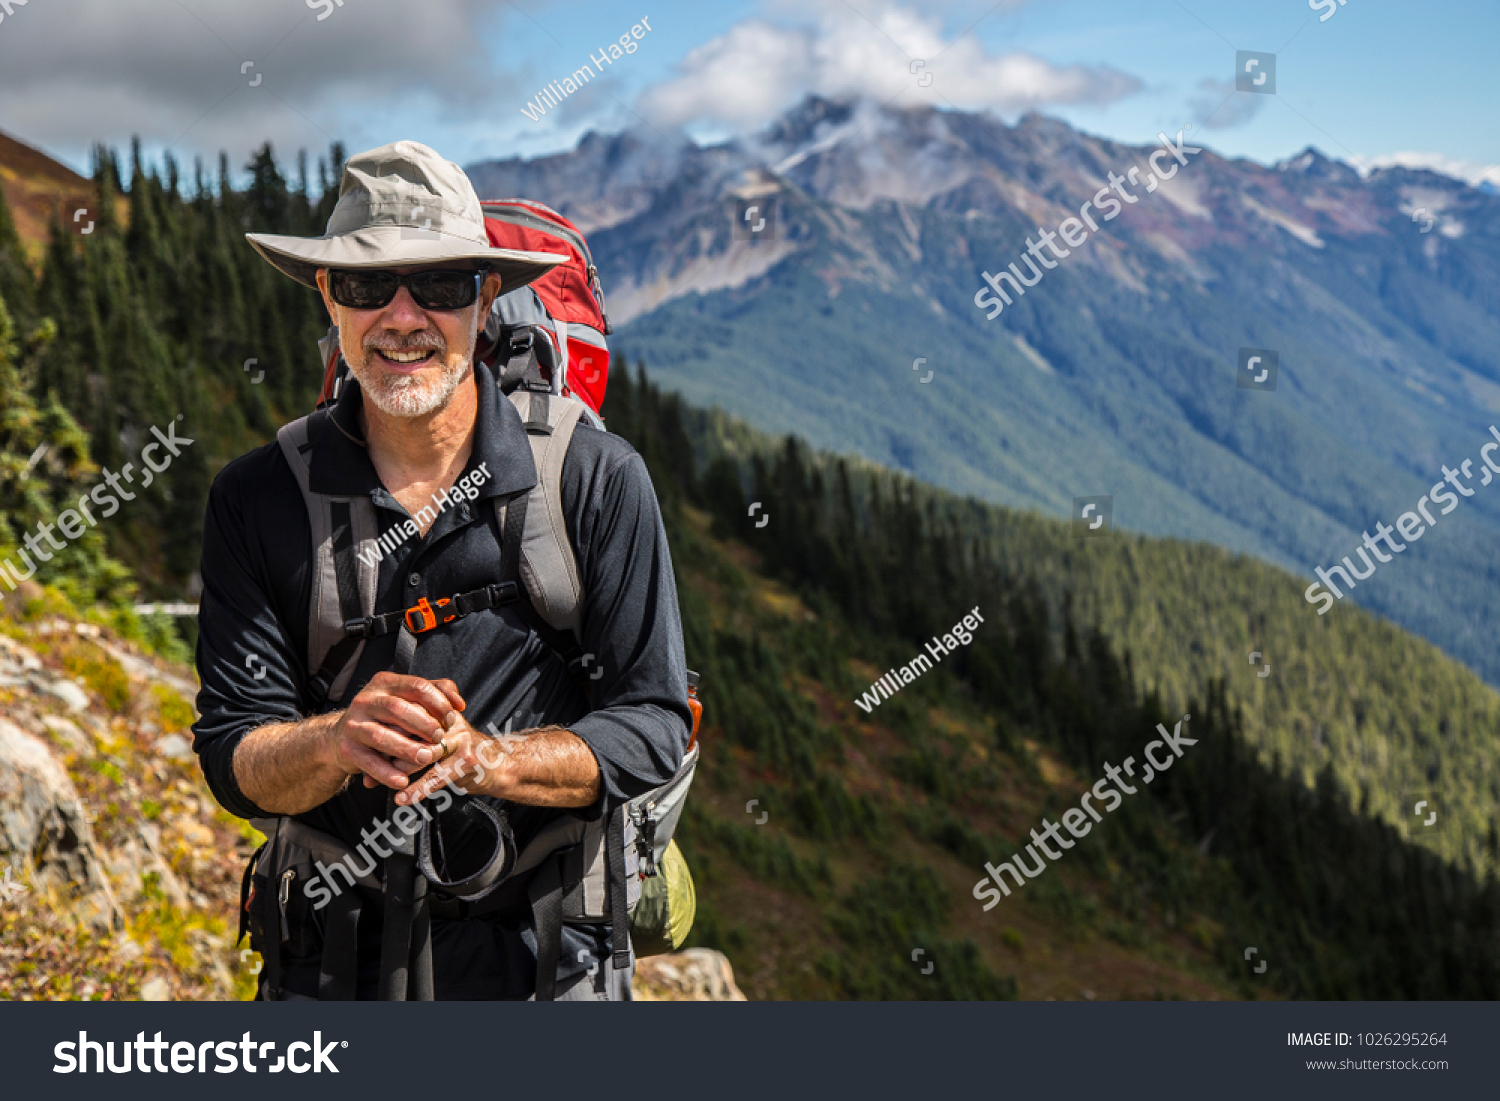 Hiker poses in front of mountain peaks range hiking backpacker old older aarp strong strength vital energetic landscape photography portrait background colorful adventure retired retirement outdoor  #1026295264